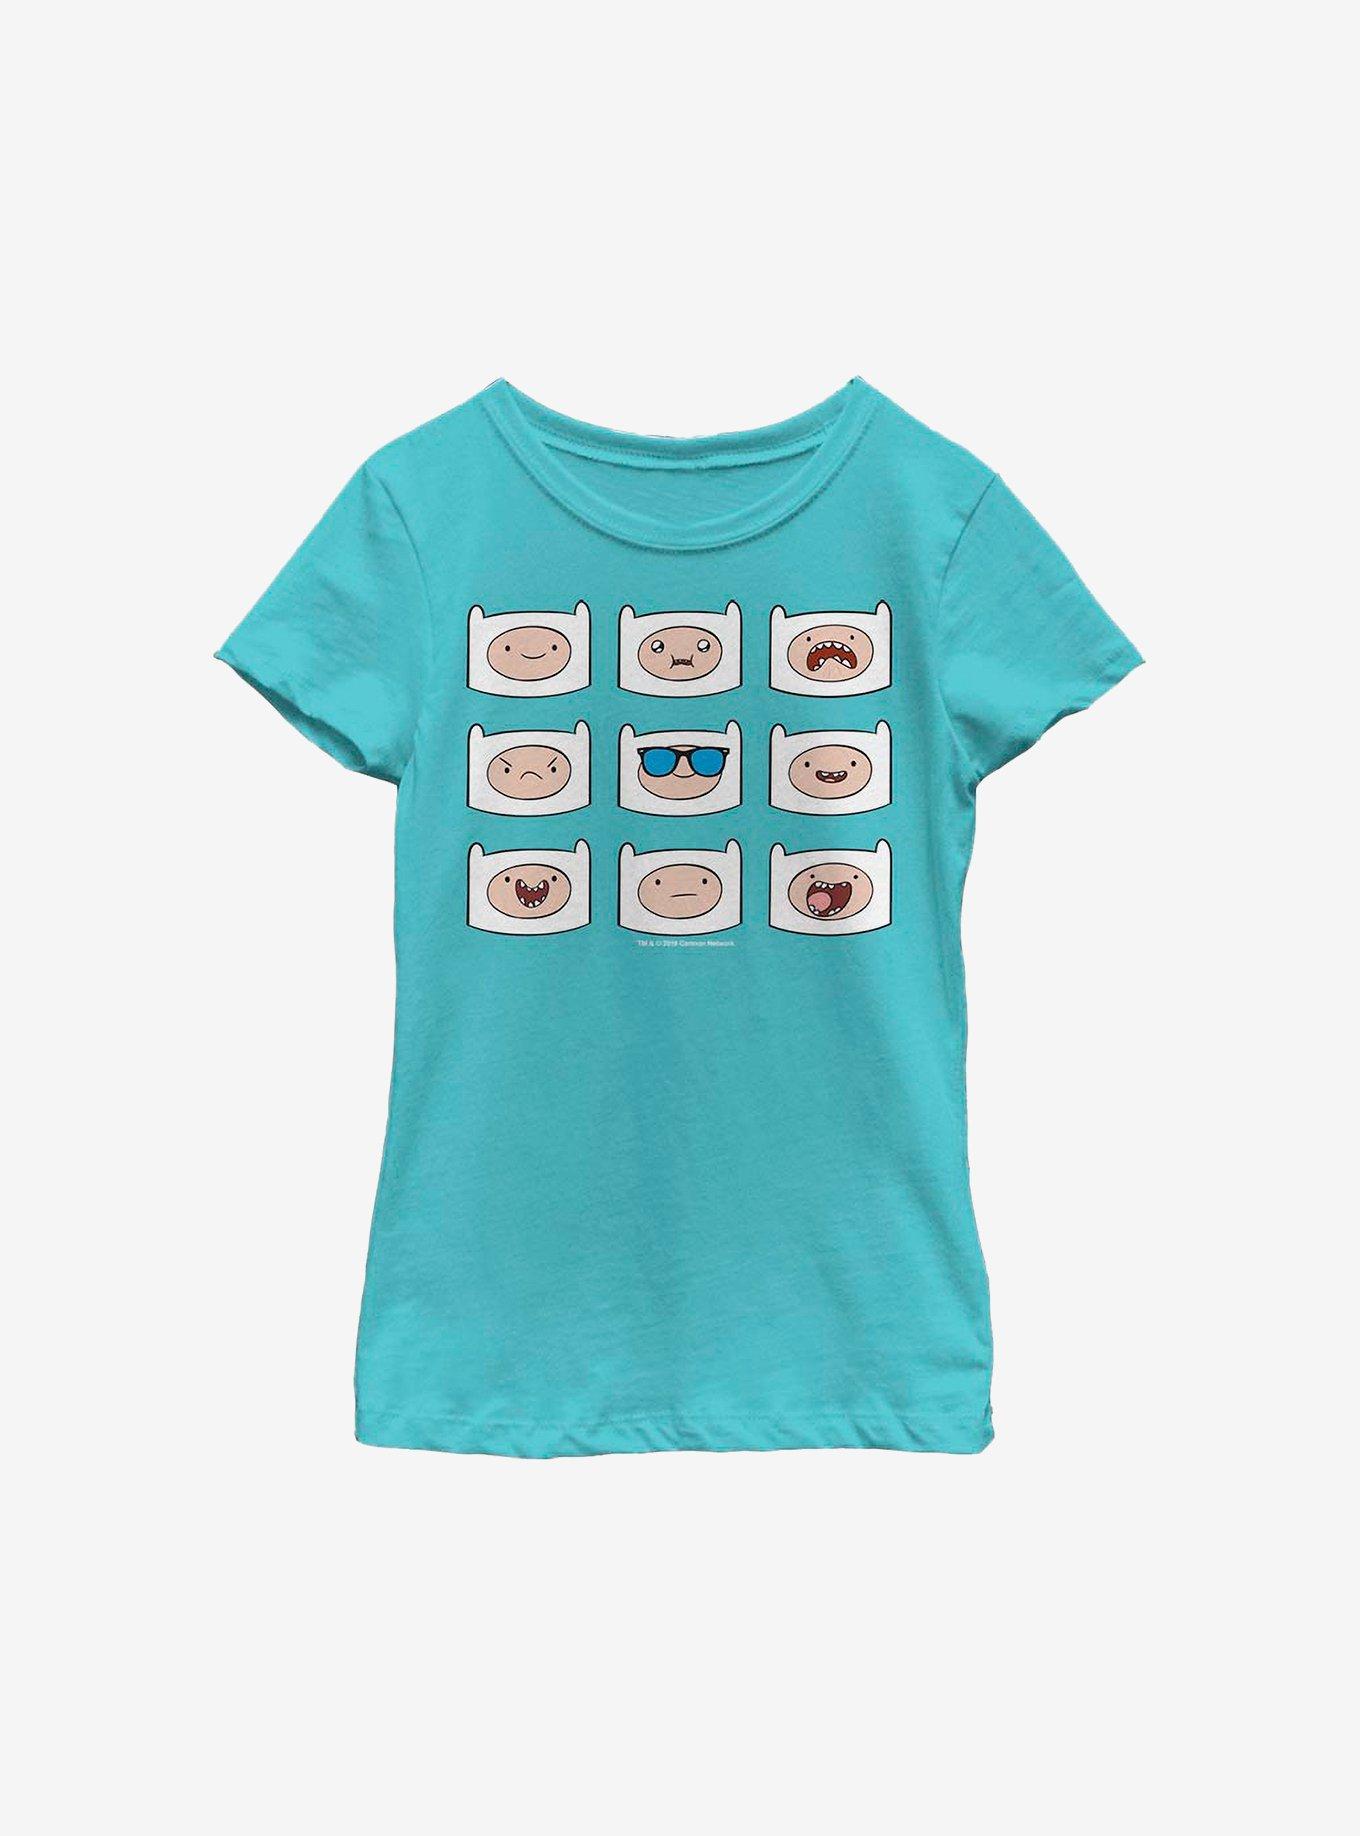 Adventure Time Finn Many Faces Youth Girls T-Shirt, , hi-res